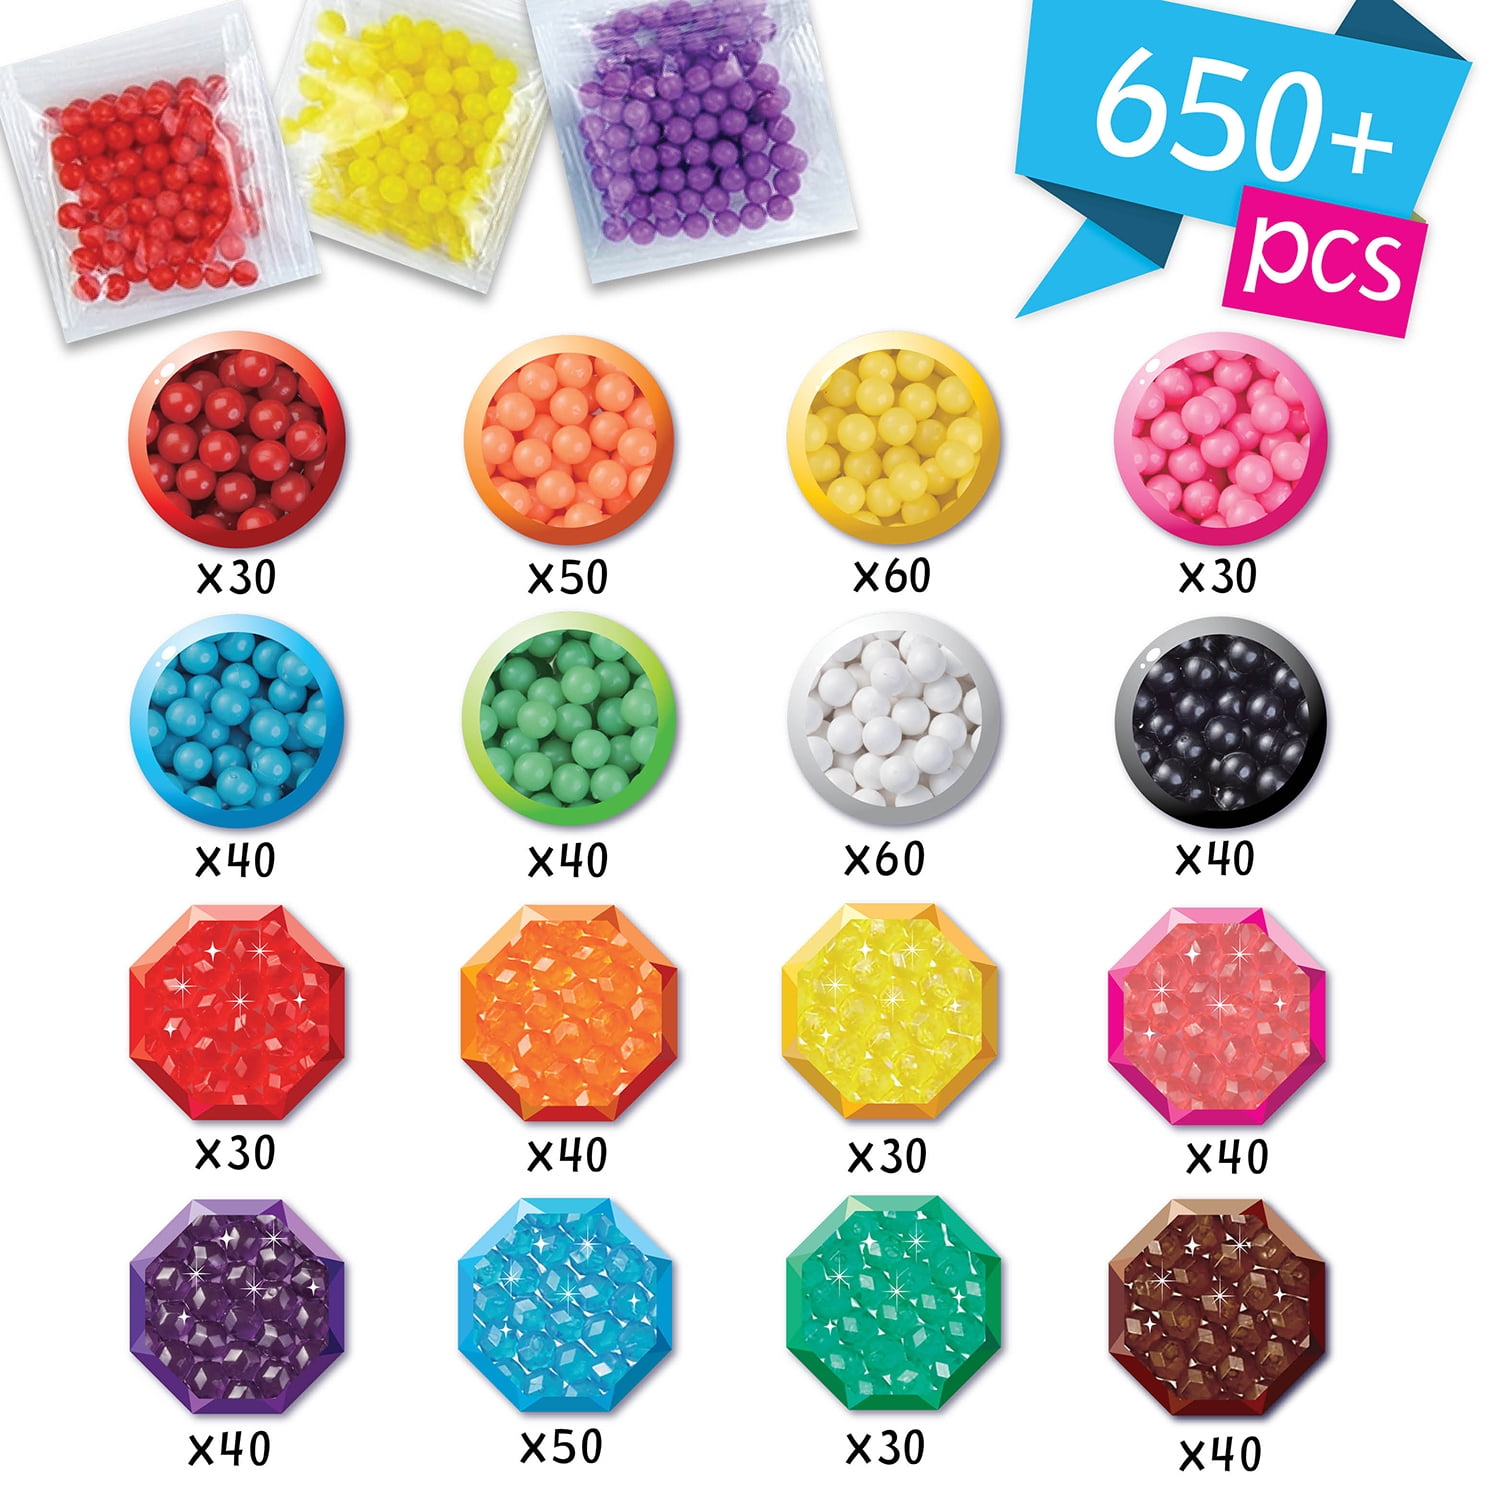 Aquabeads Starter Pack Complete Arts & Crafts Bead Kit for Children - Over 650 Beads